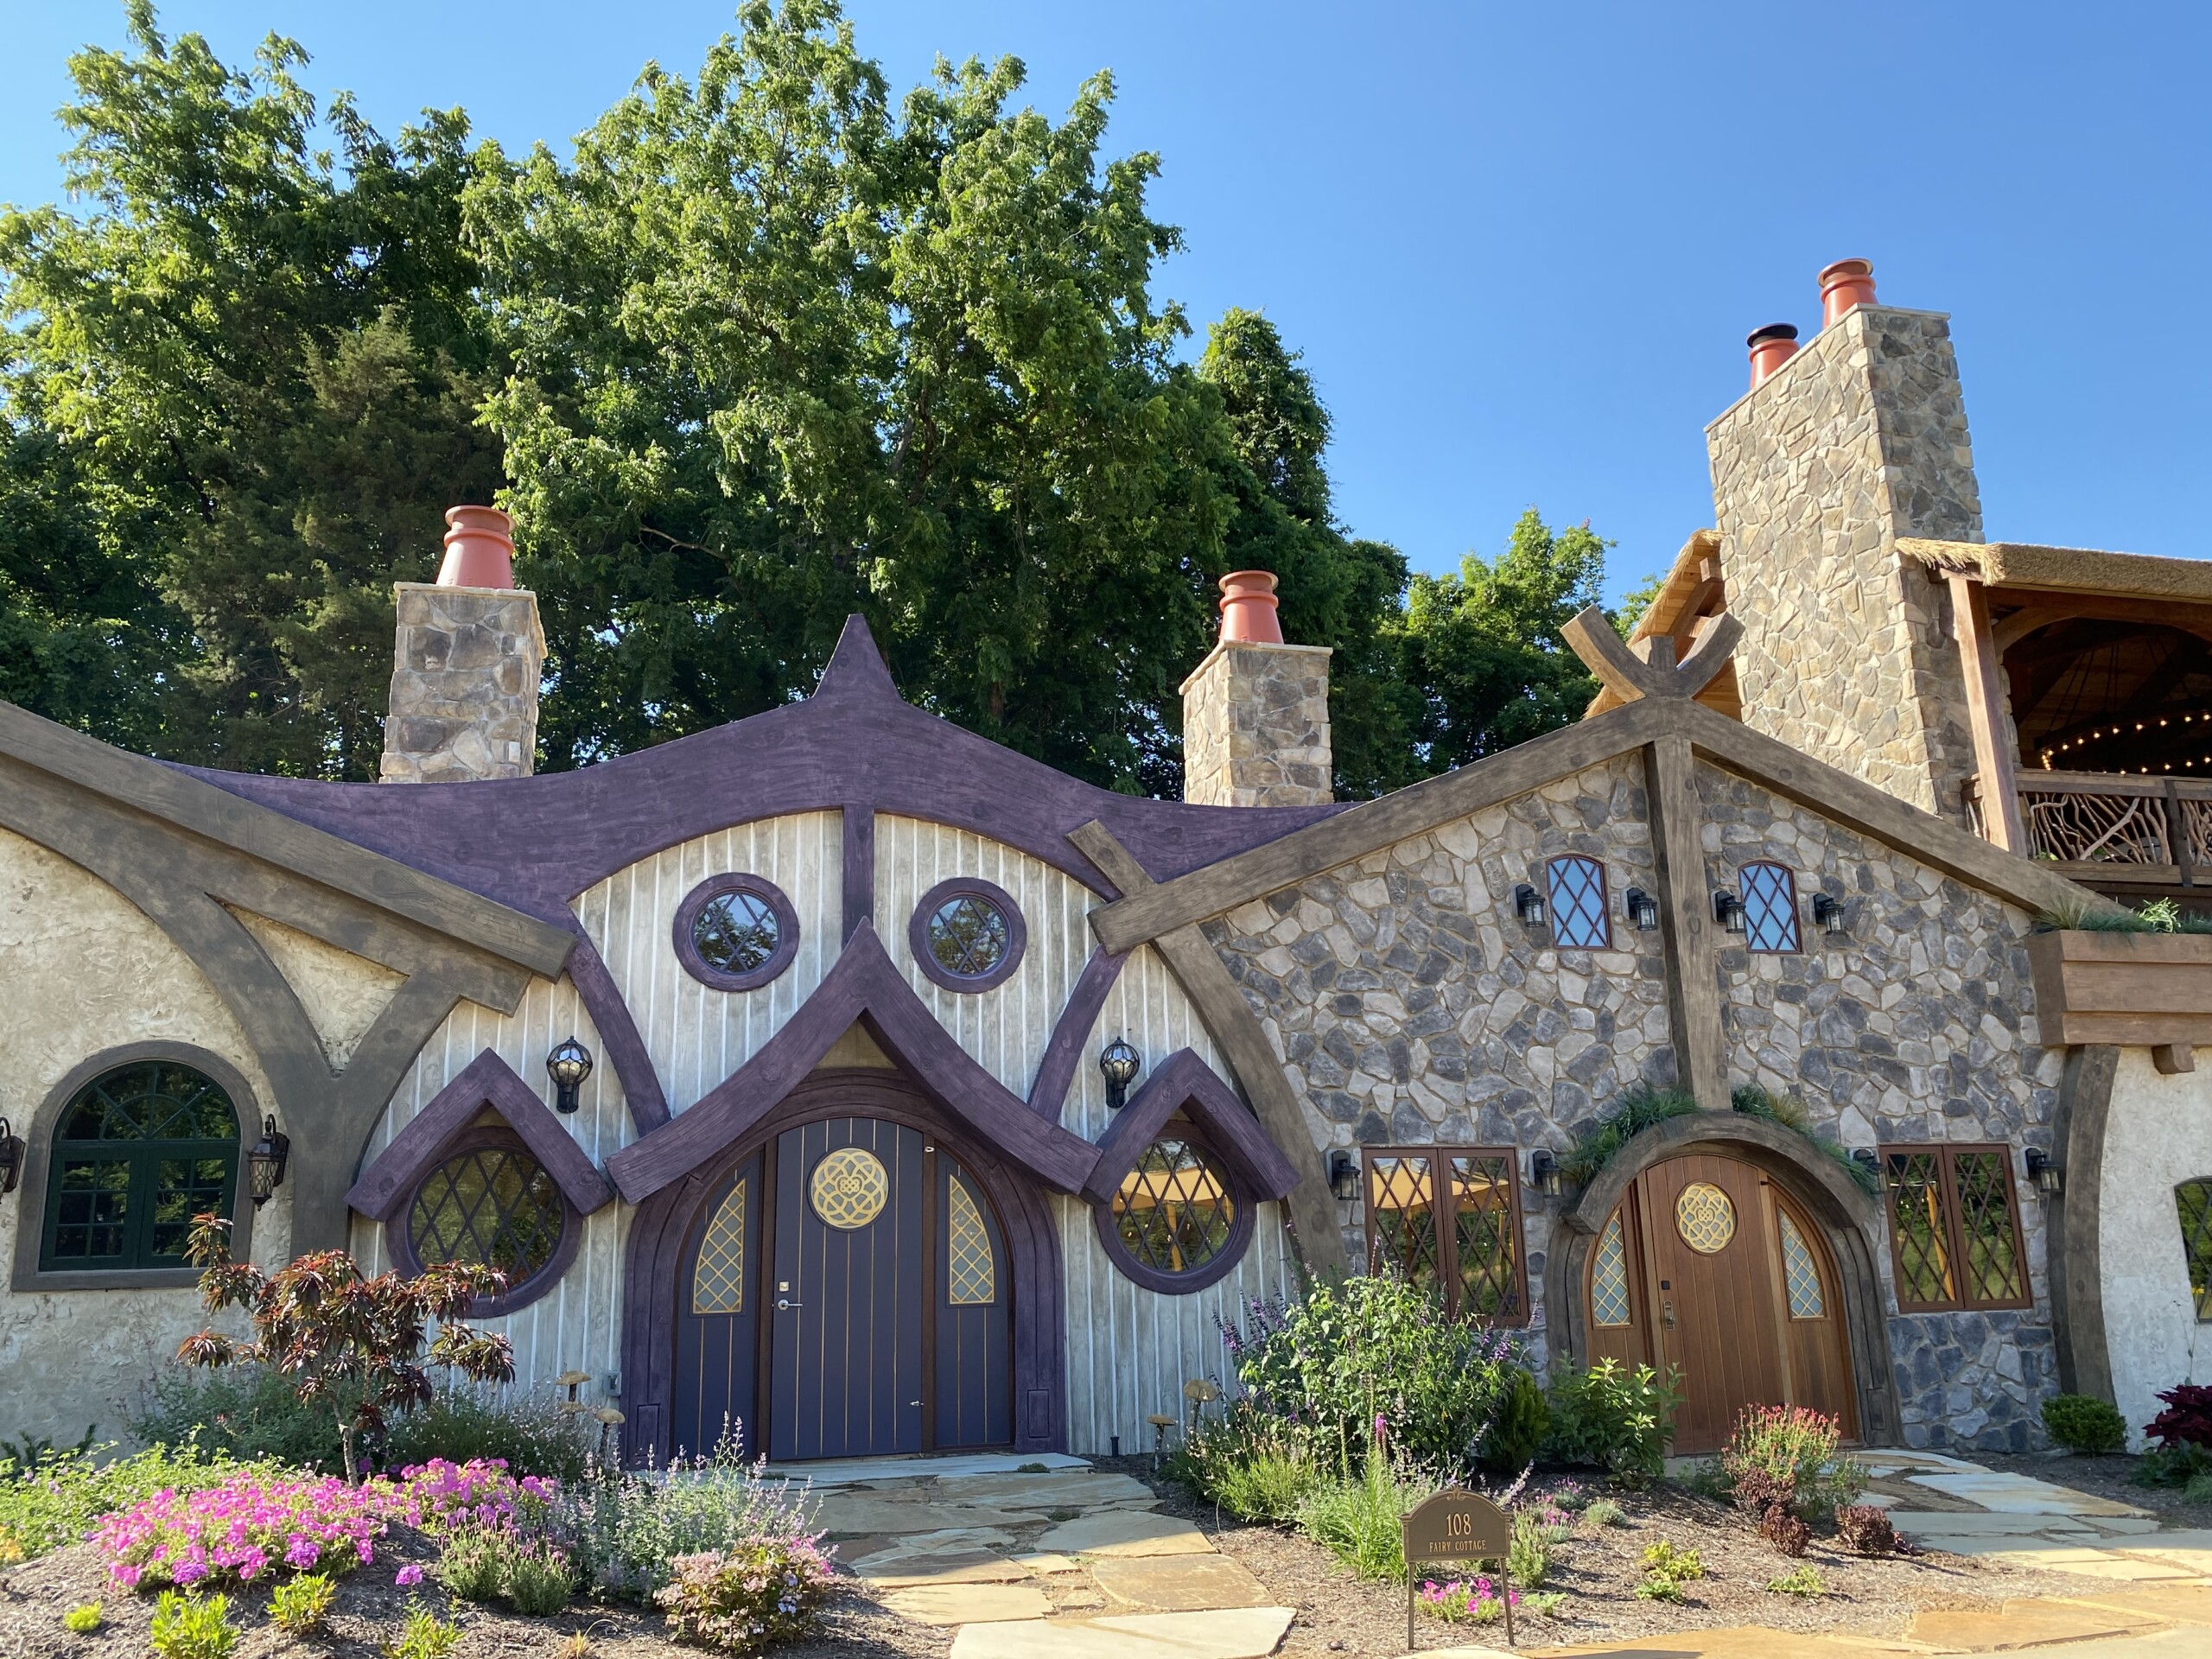 Ancient Lore Village – A Great Family Getaway in Knoxville, TN